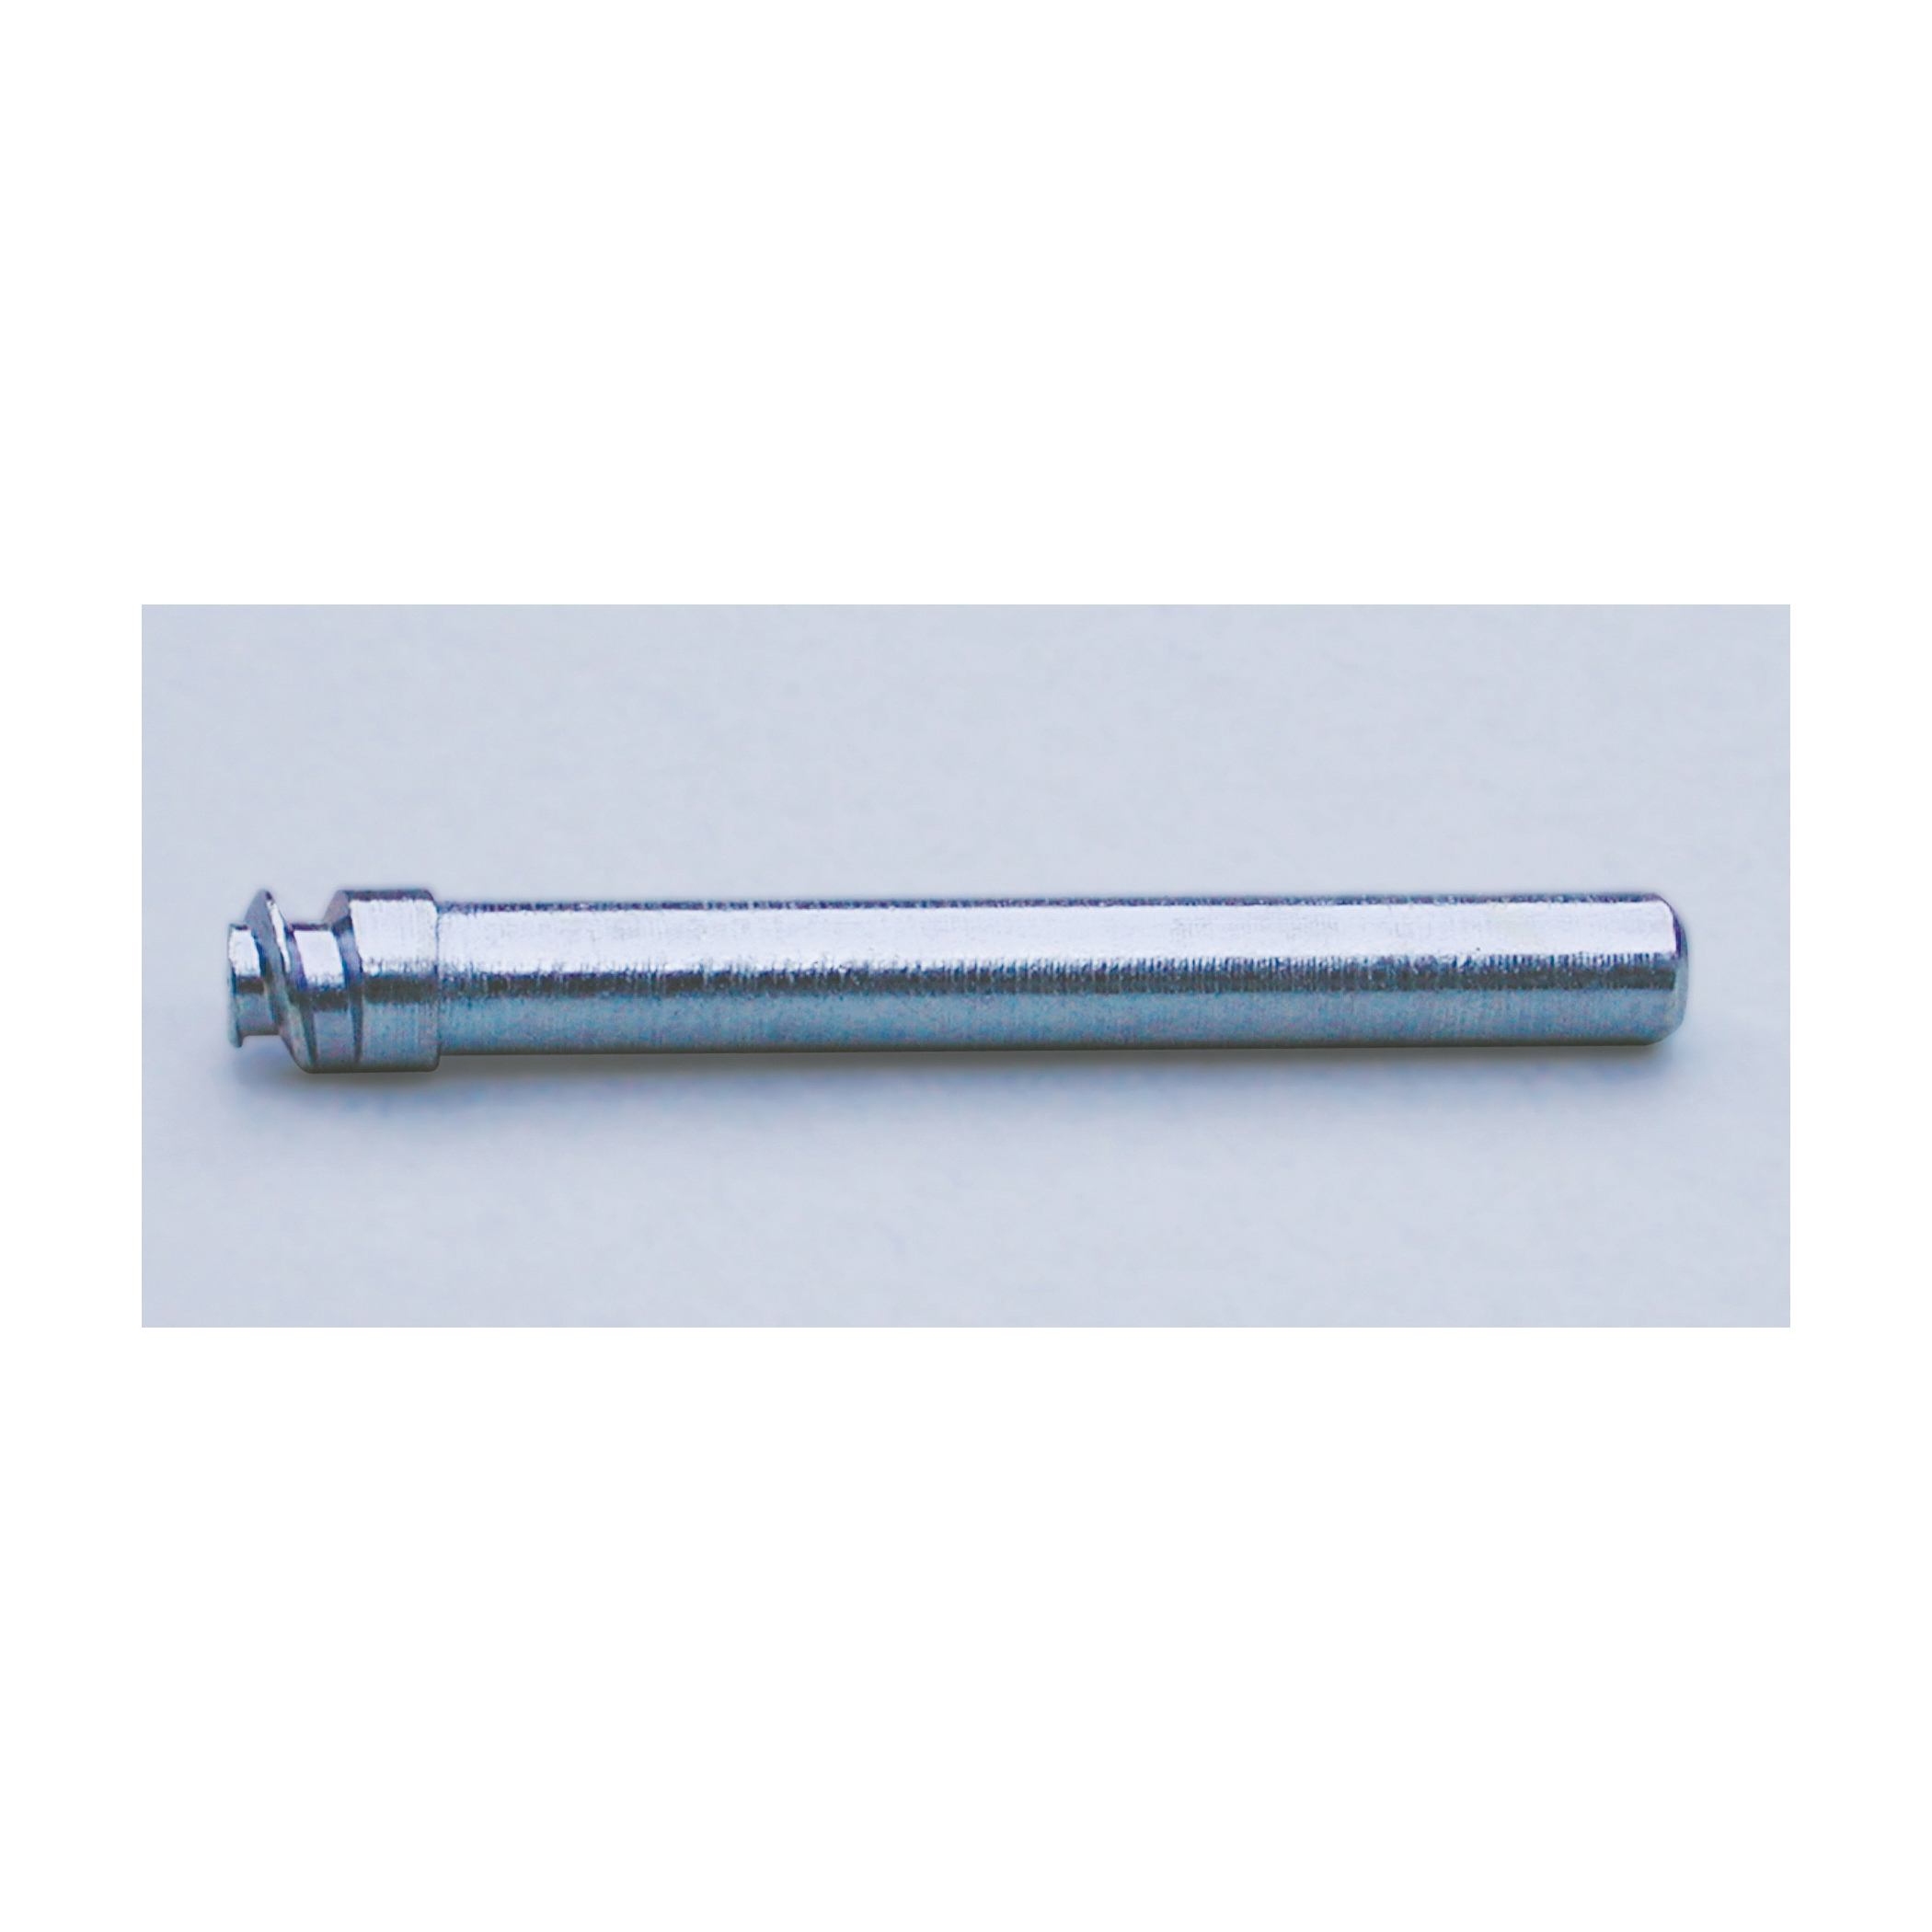 Standard Abrasives™ 051115-32832 700143 Threaded Specialty Mandrel, 1/4 in Shank, 3 in OAL, For Use With Pad, Stars, Circle Buffs and Cross Buff